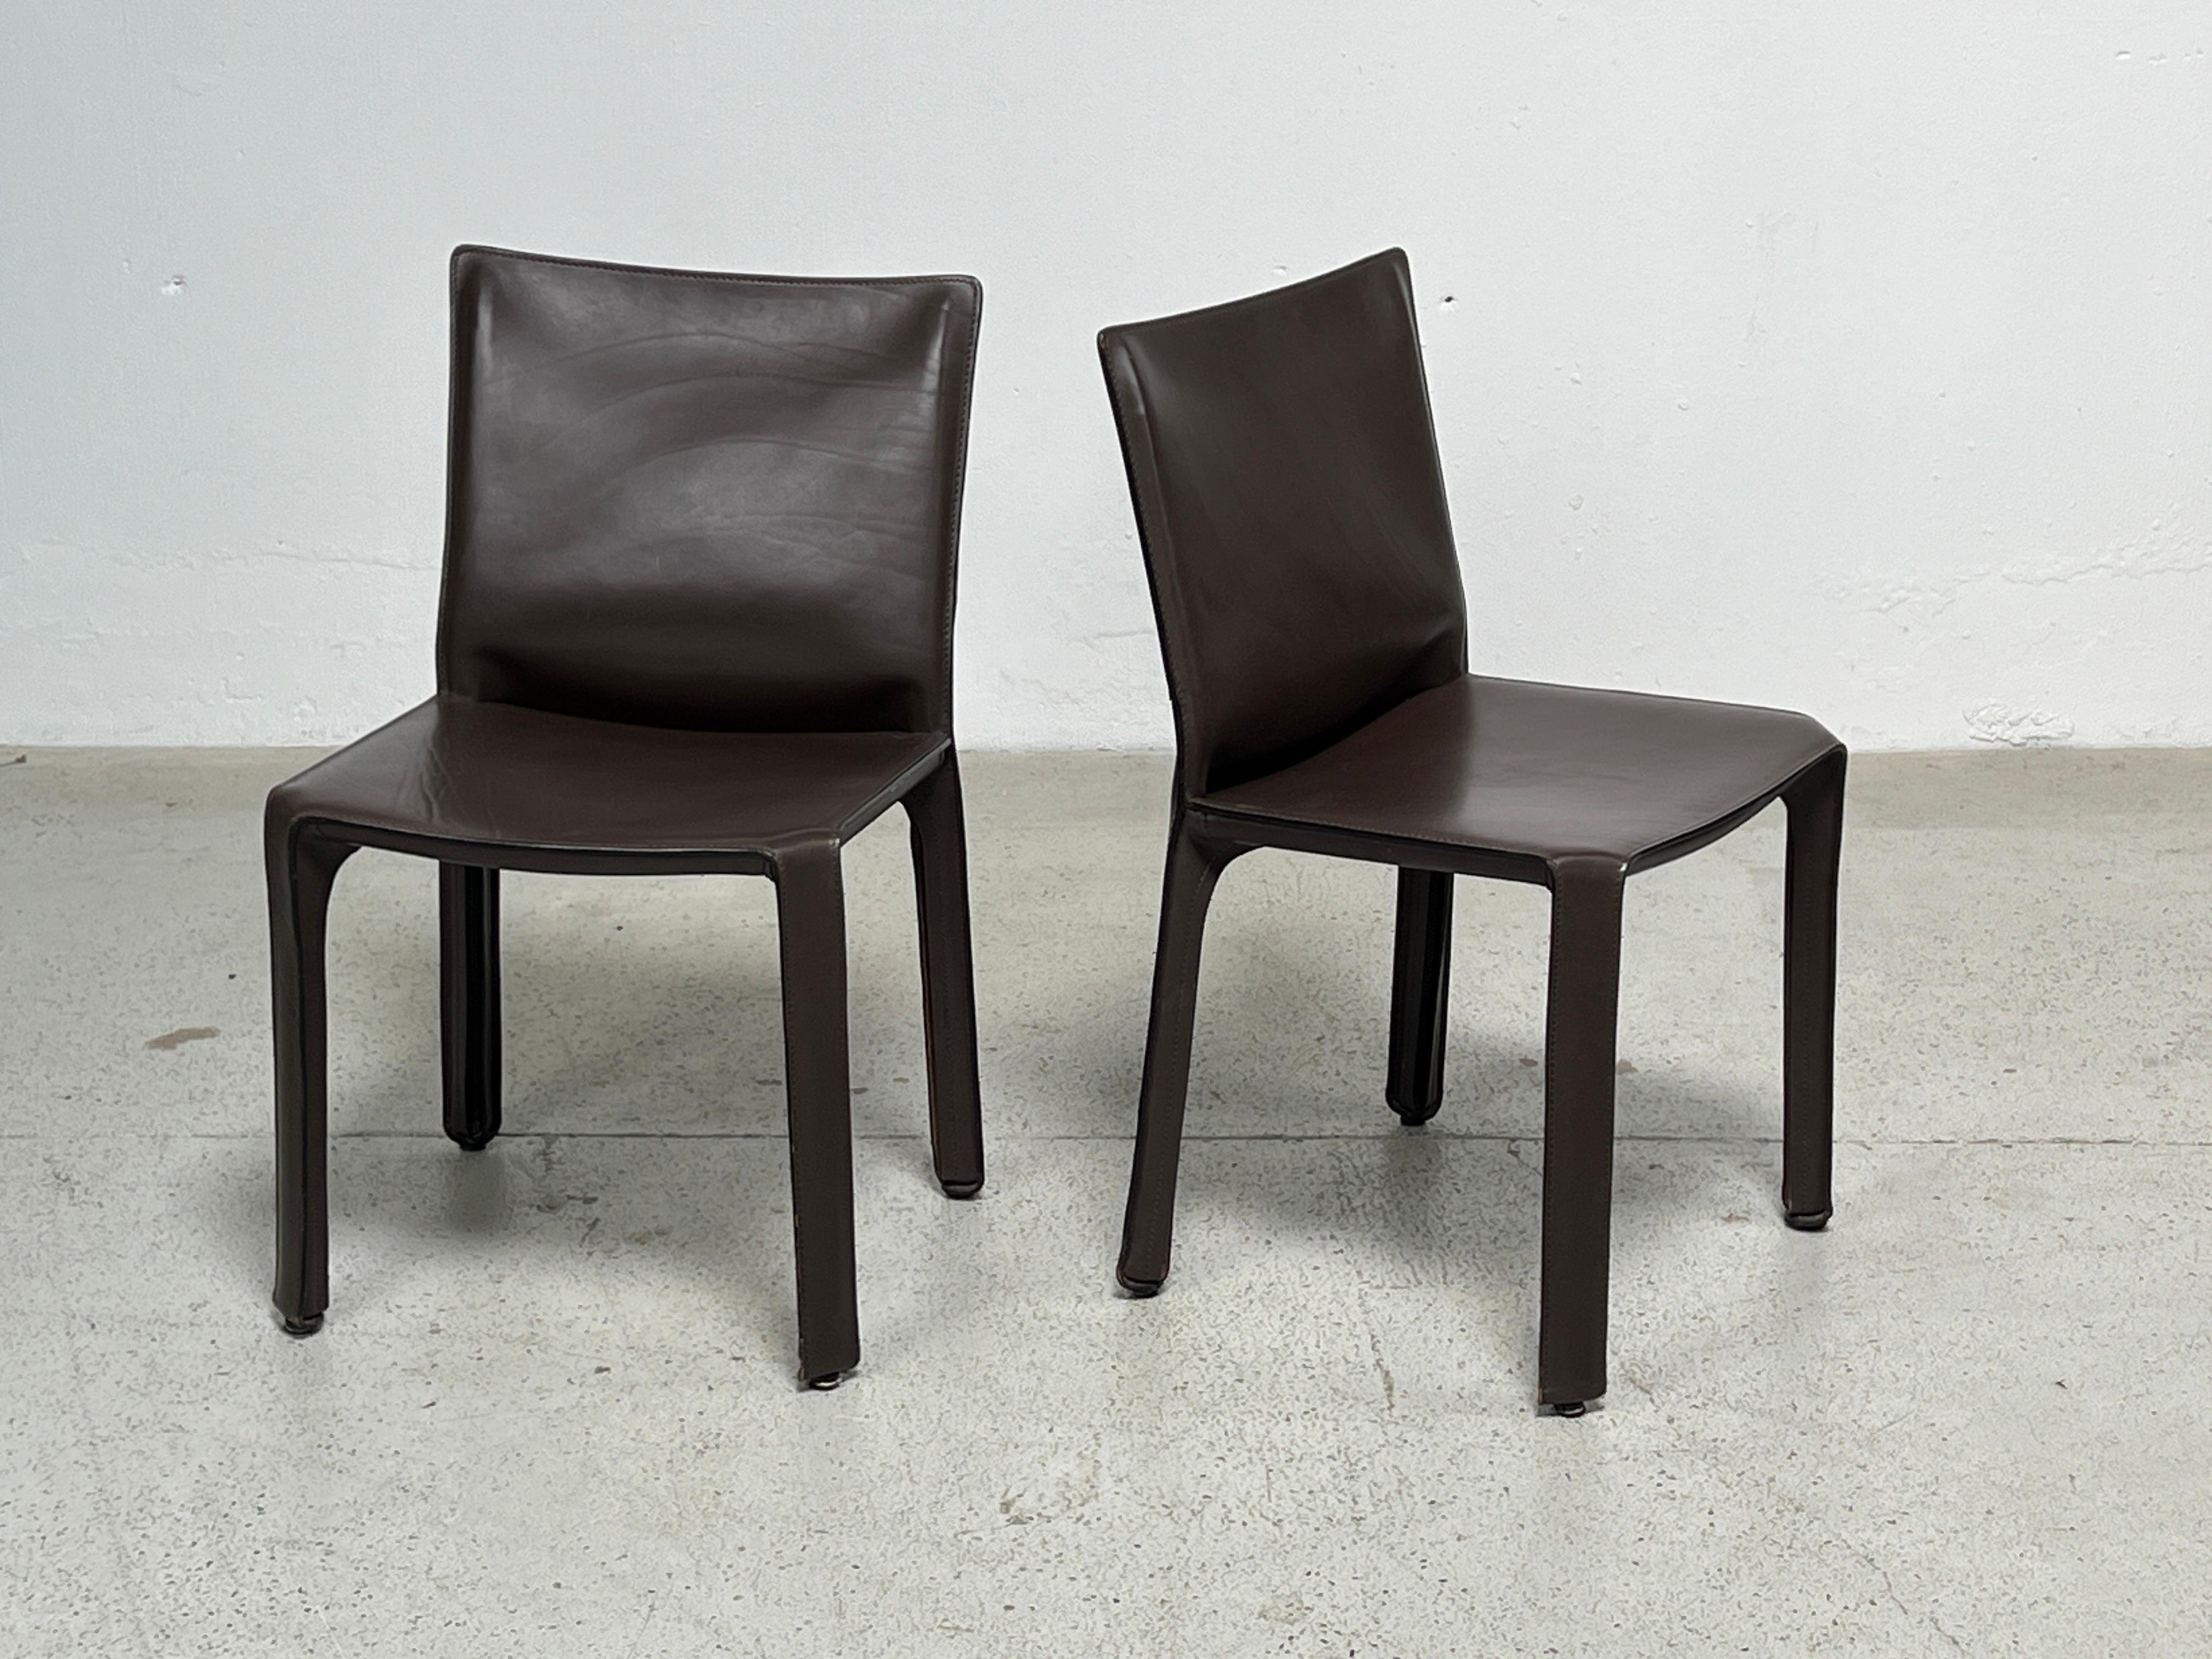 Four Brown Leather Cab Chairs by Mario Bellini  For Sale 3